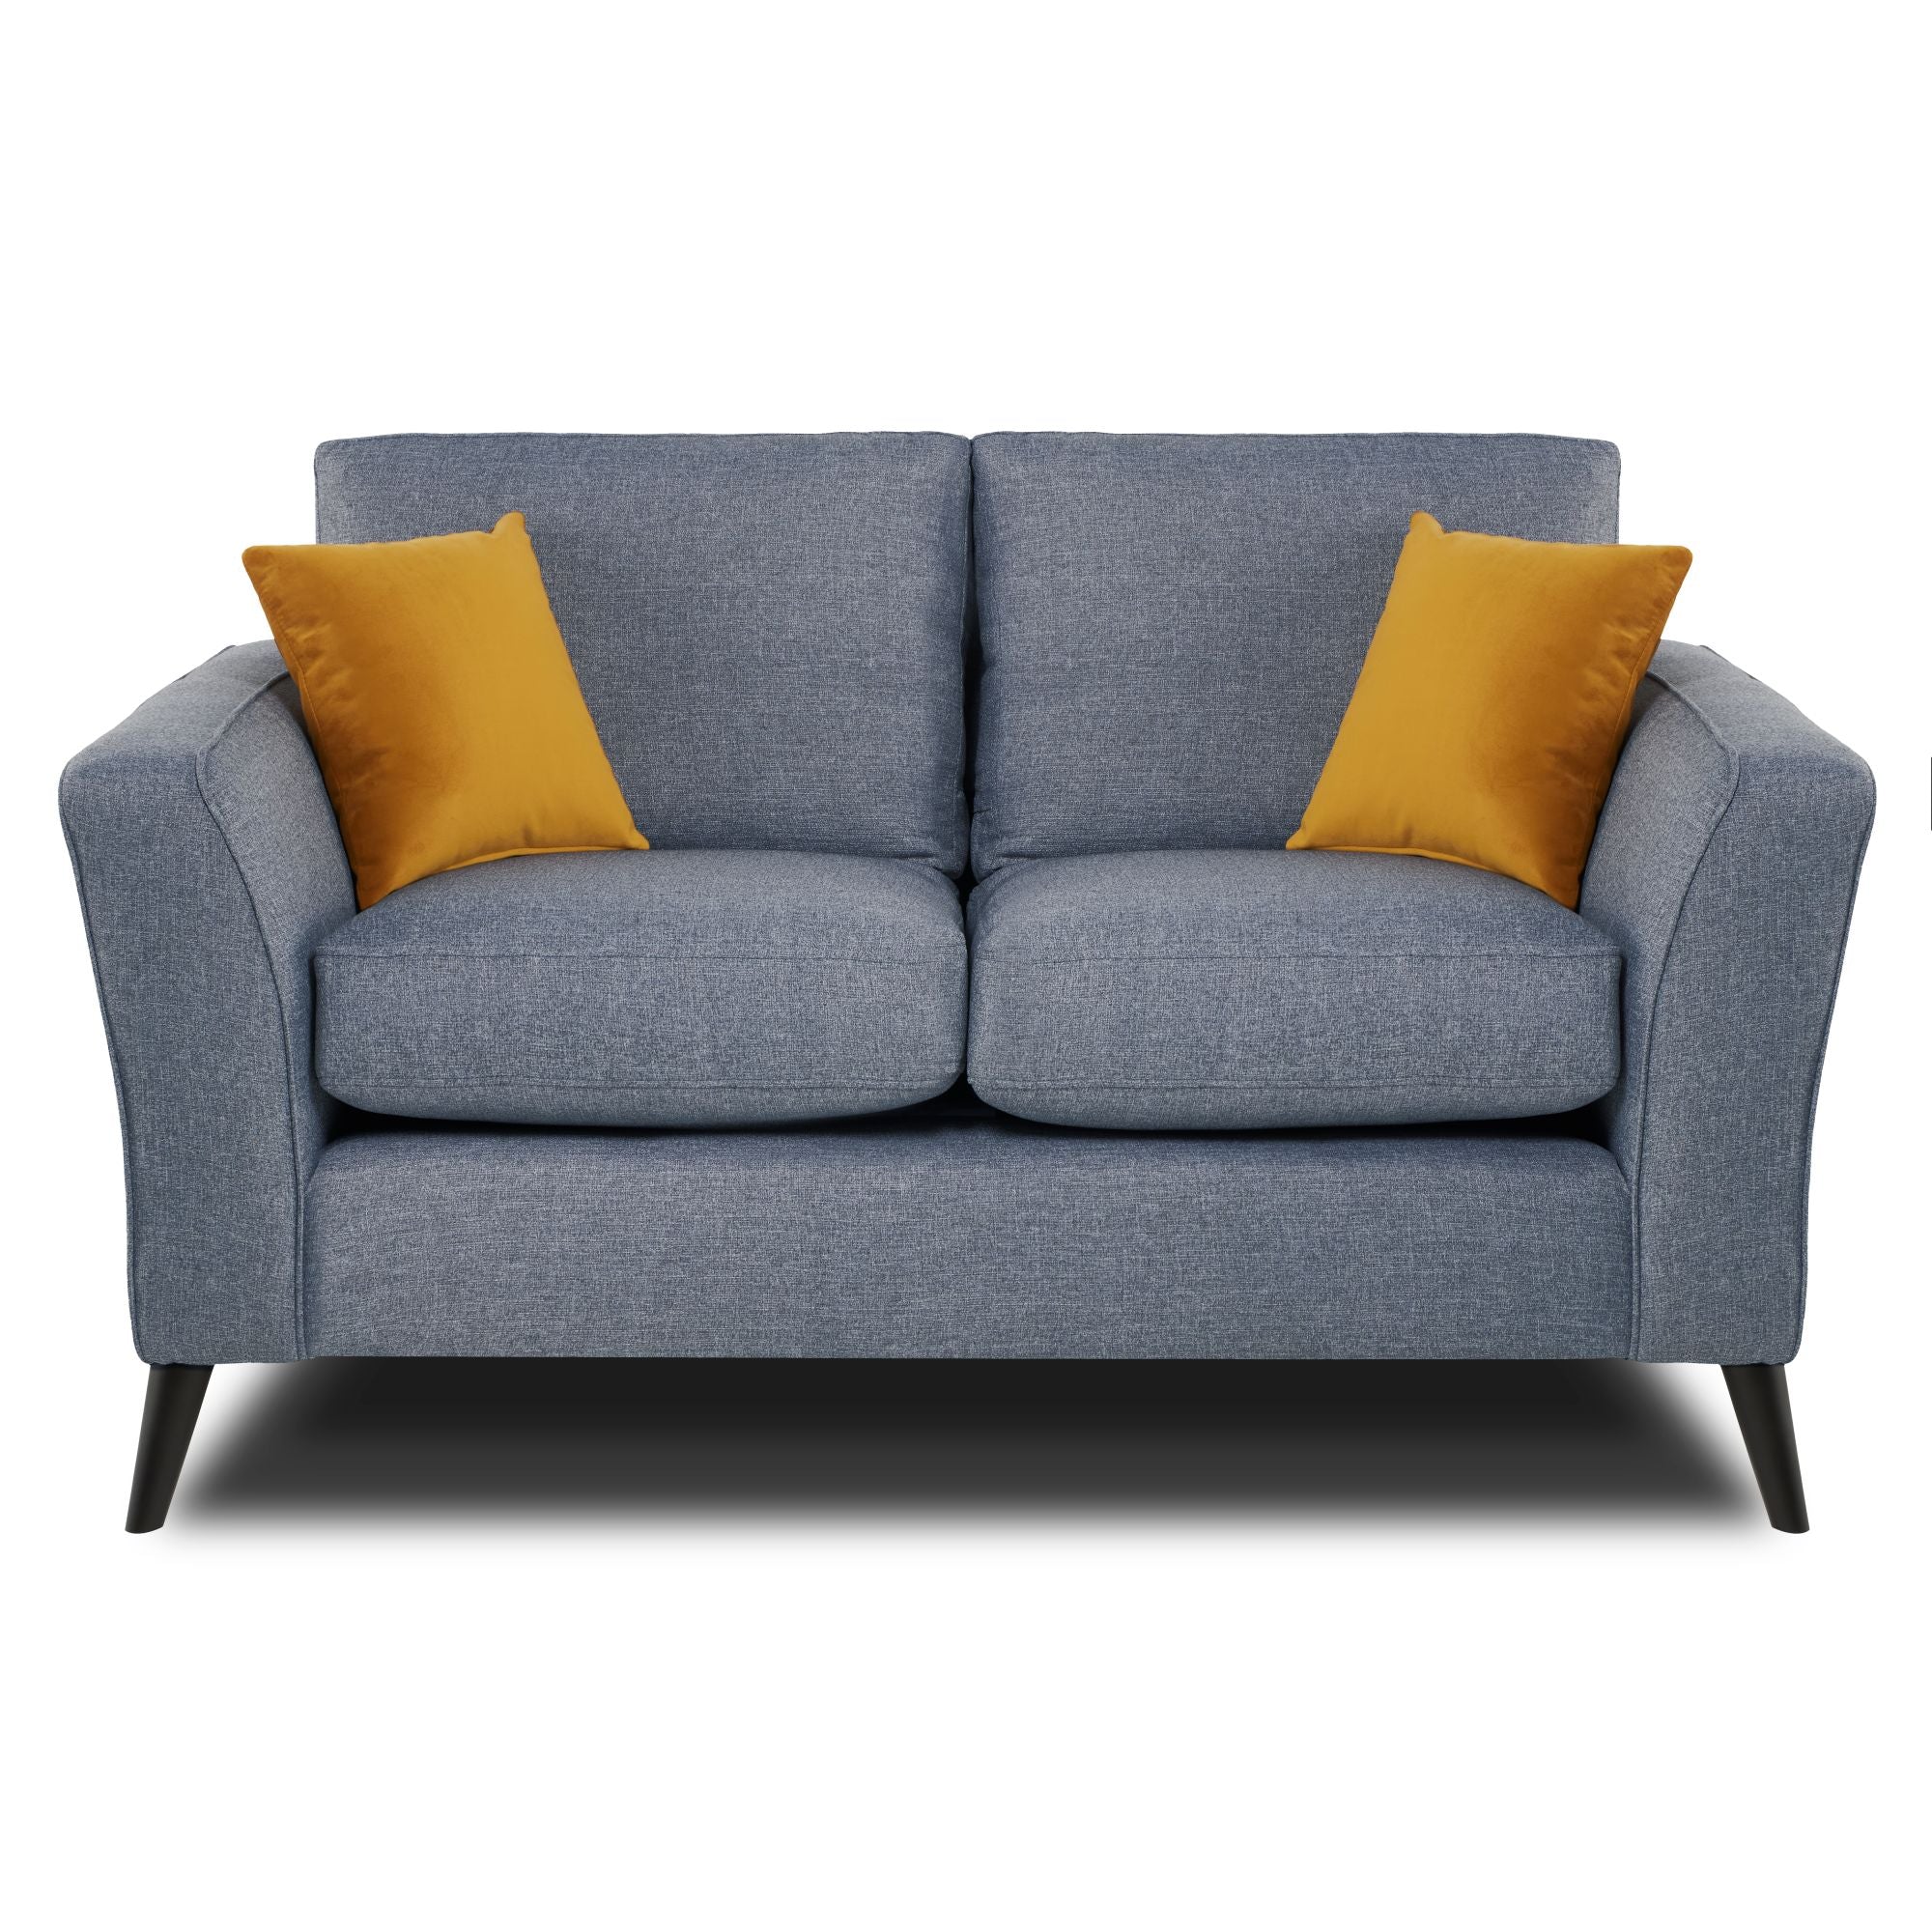 Libby 2 seater sofa in denim colour on white background